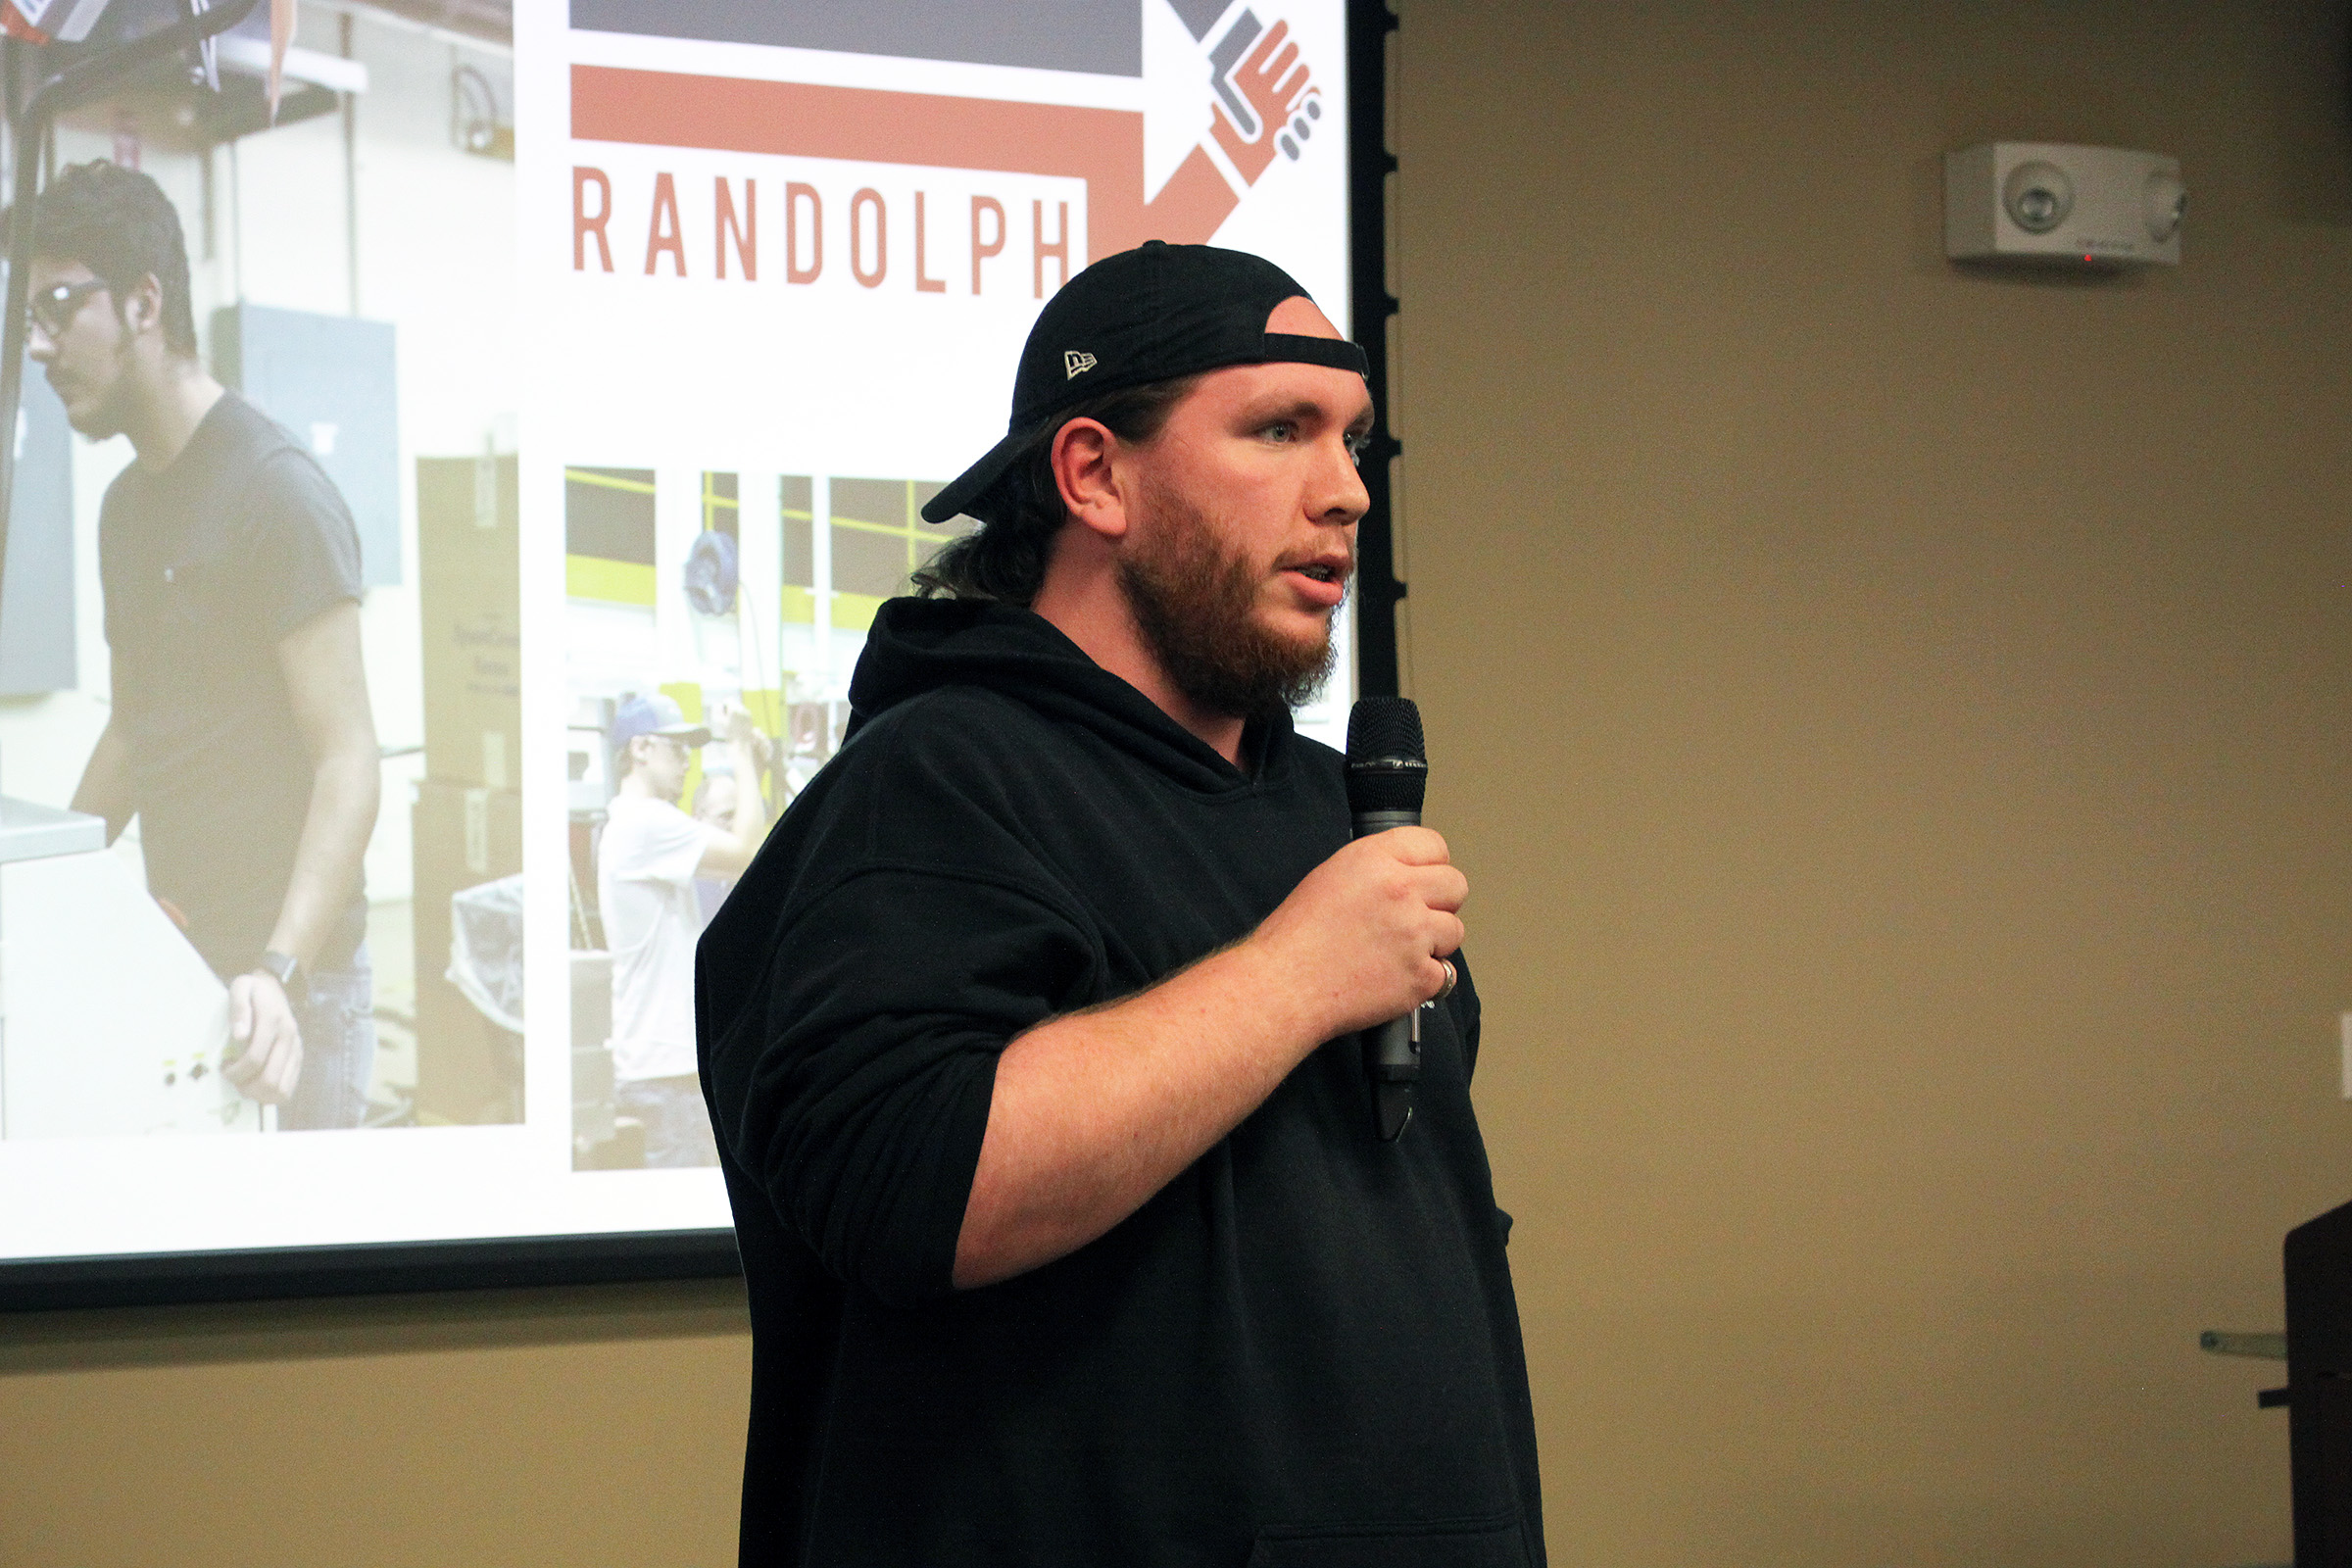 Rocky Lewis, an apprentice with Elastic Therapy Inc., shares how Apprenticeship Randolph has changed his life.